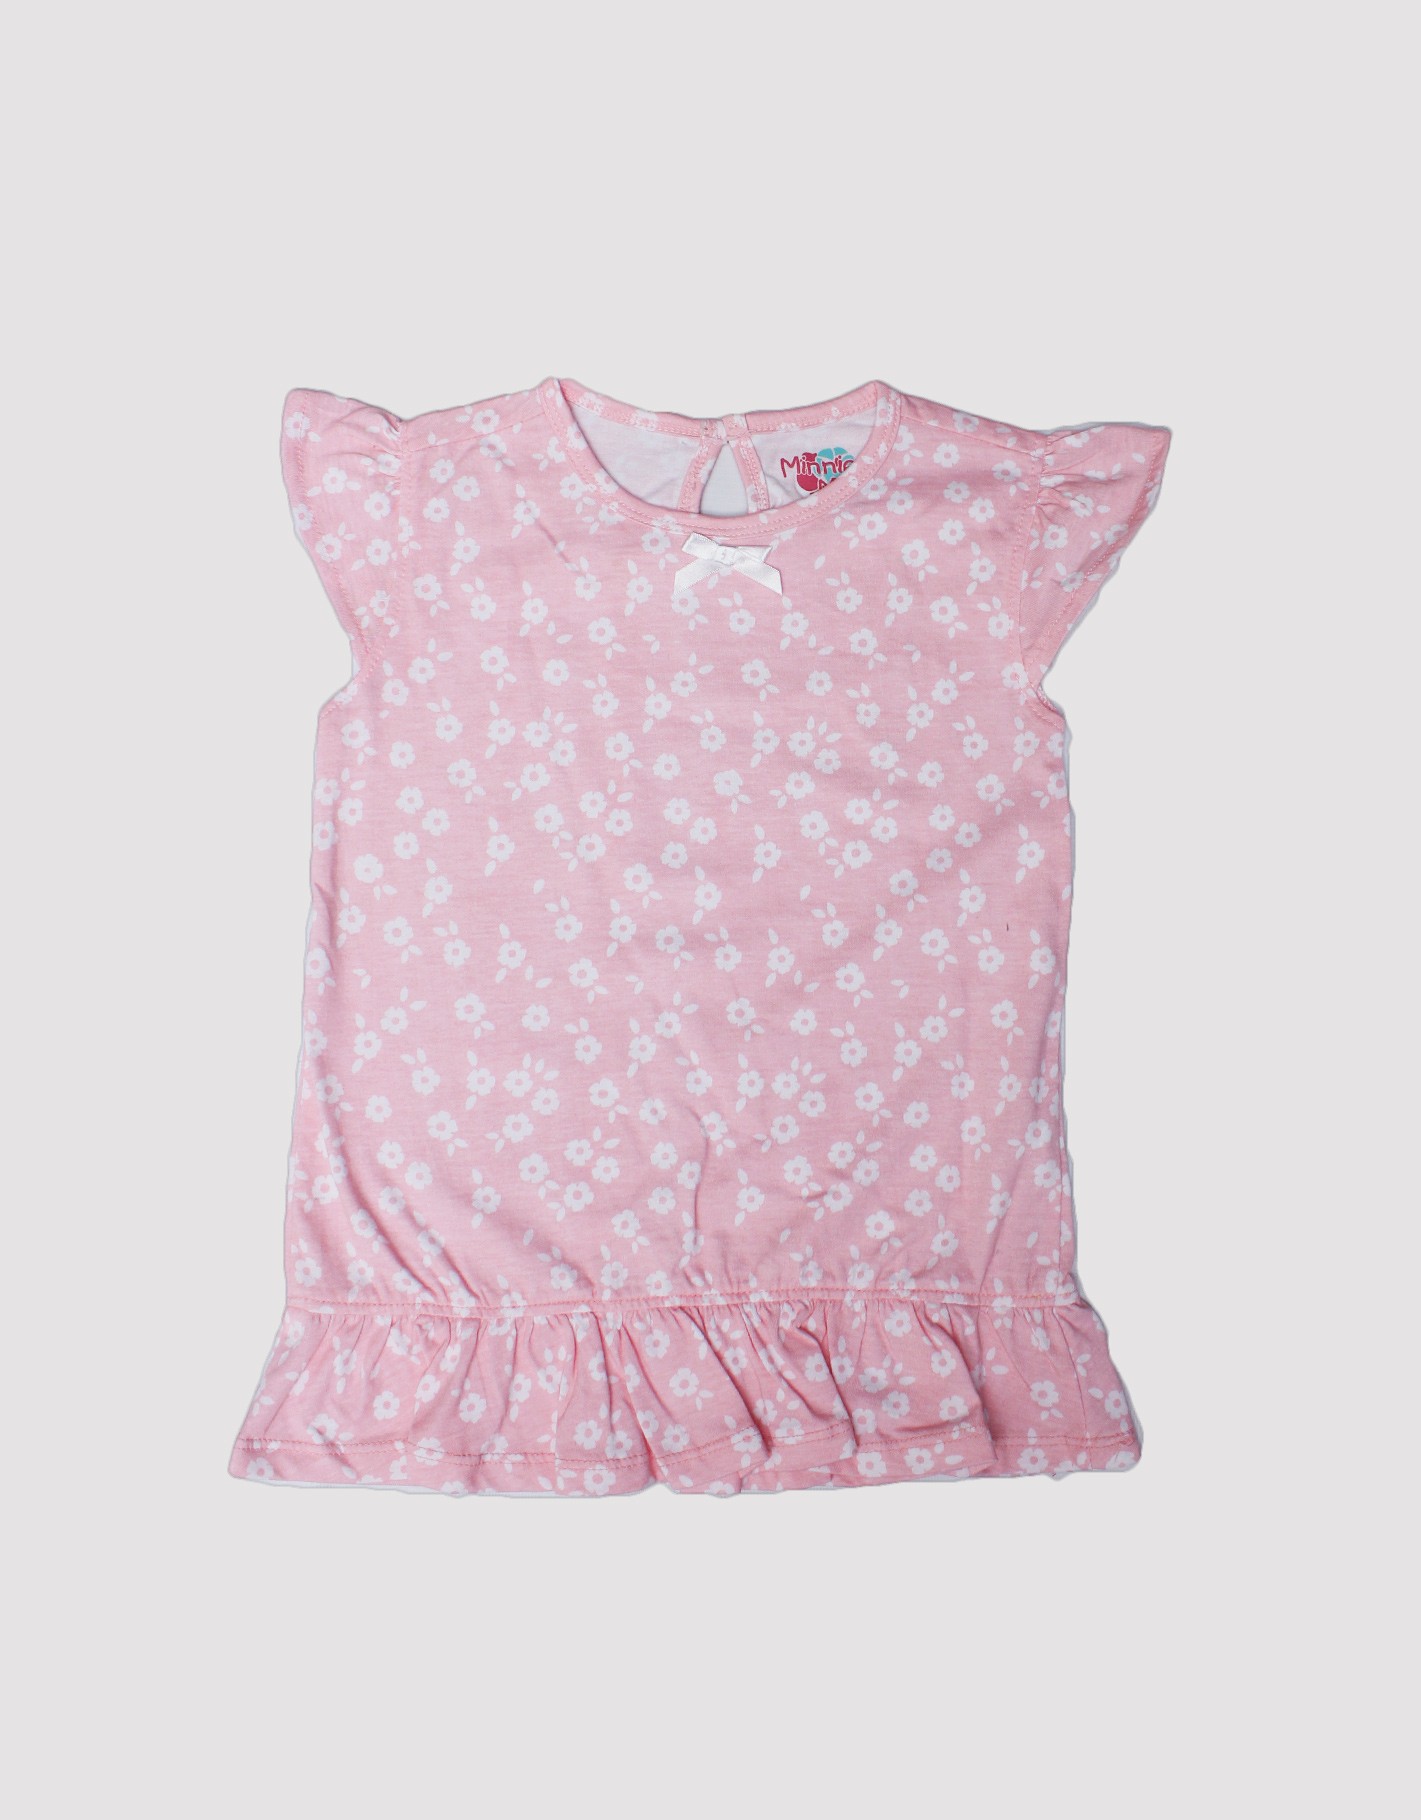 Minnie Minors Latest T-Shirts For Baby Girls - PK Vogue